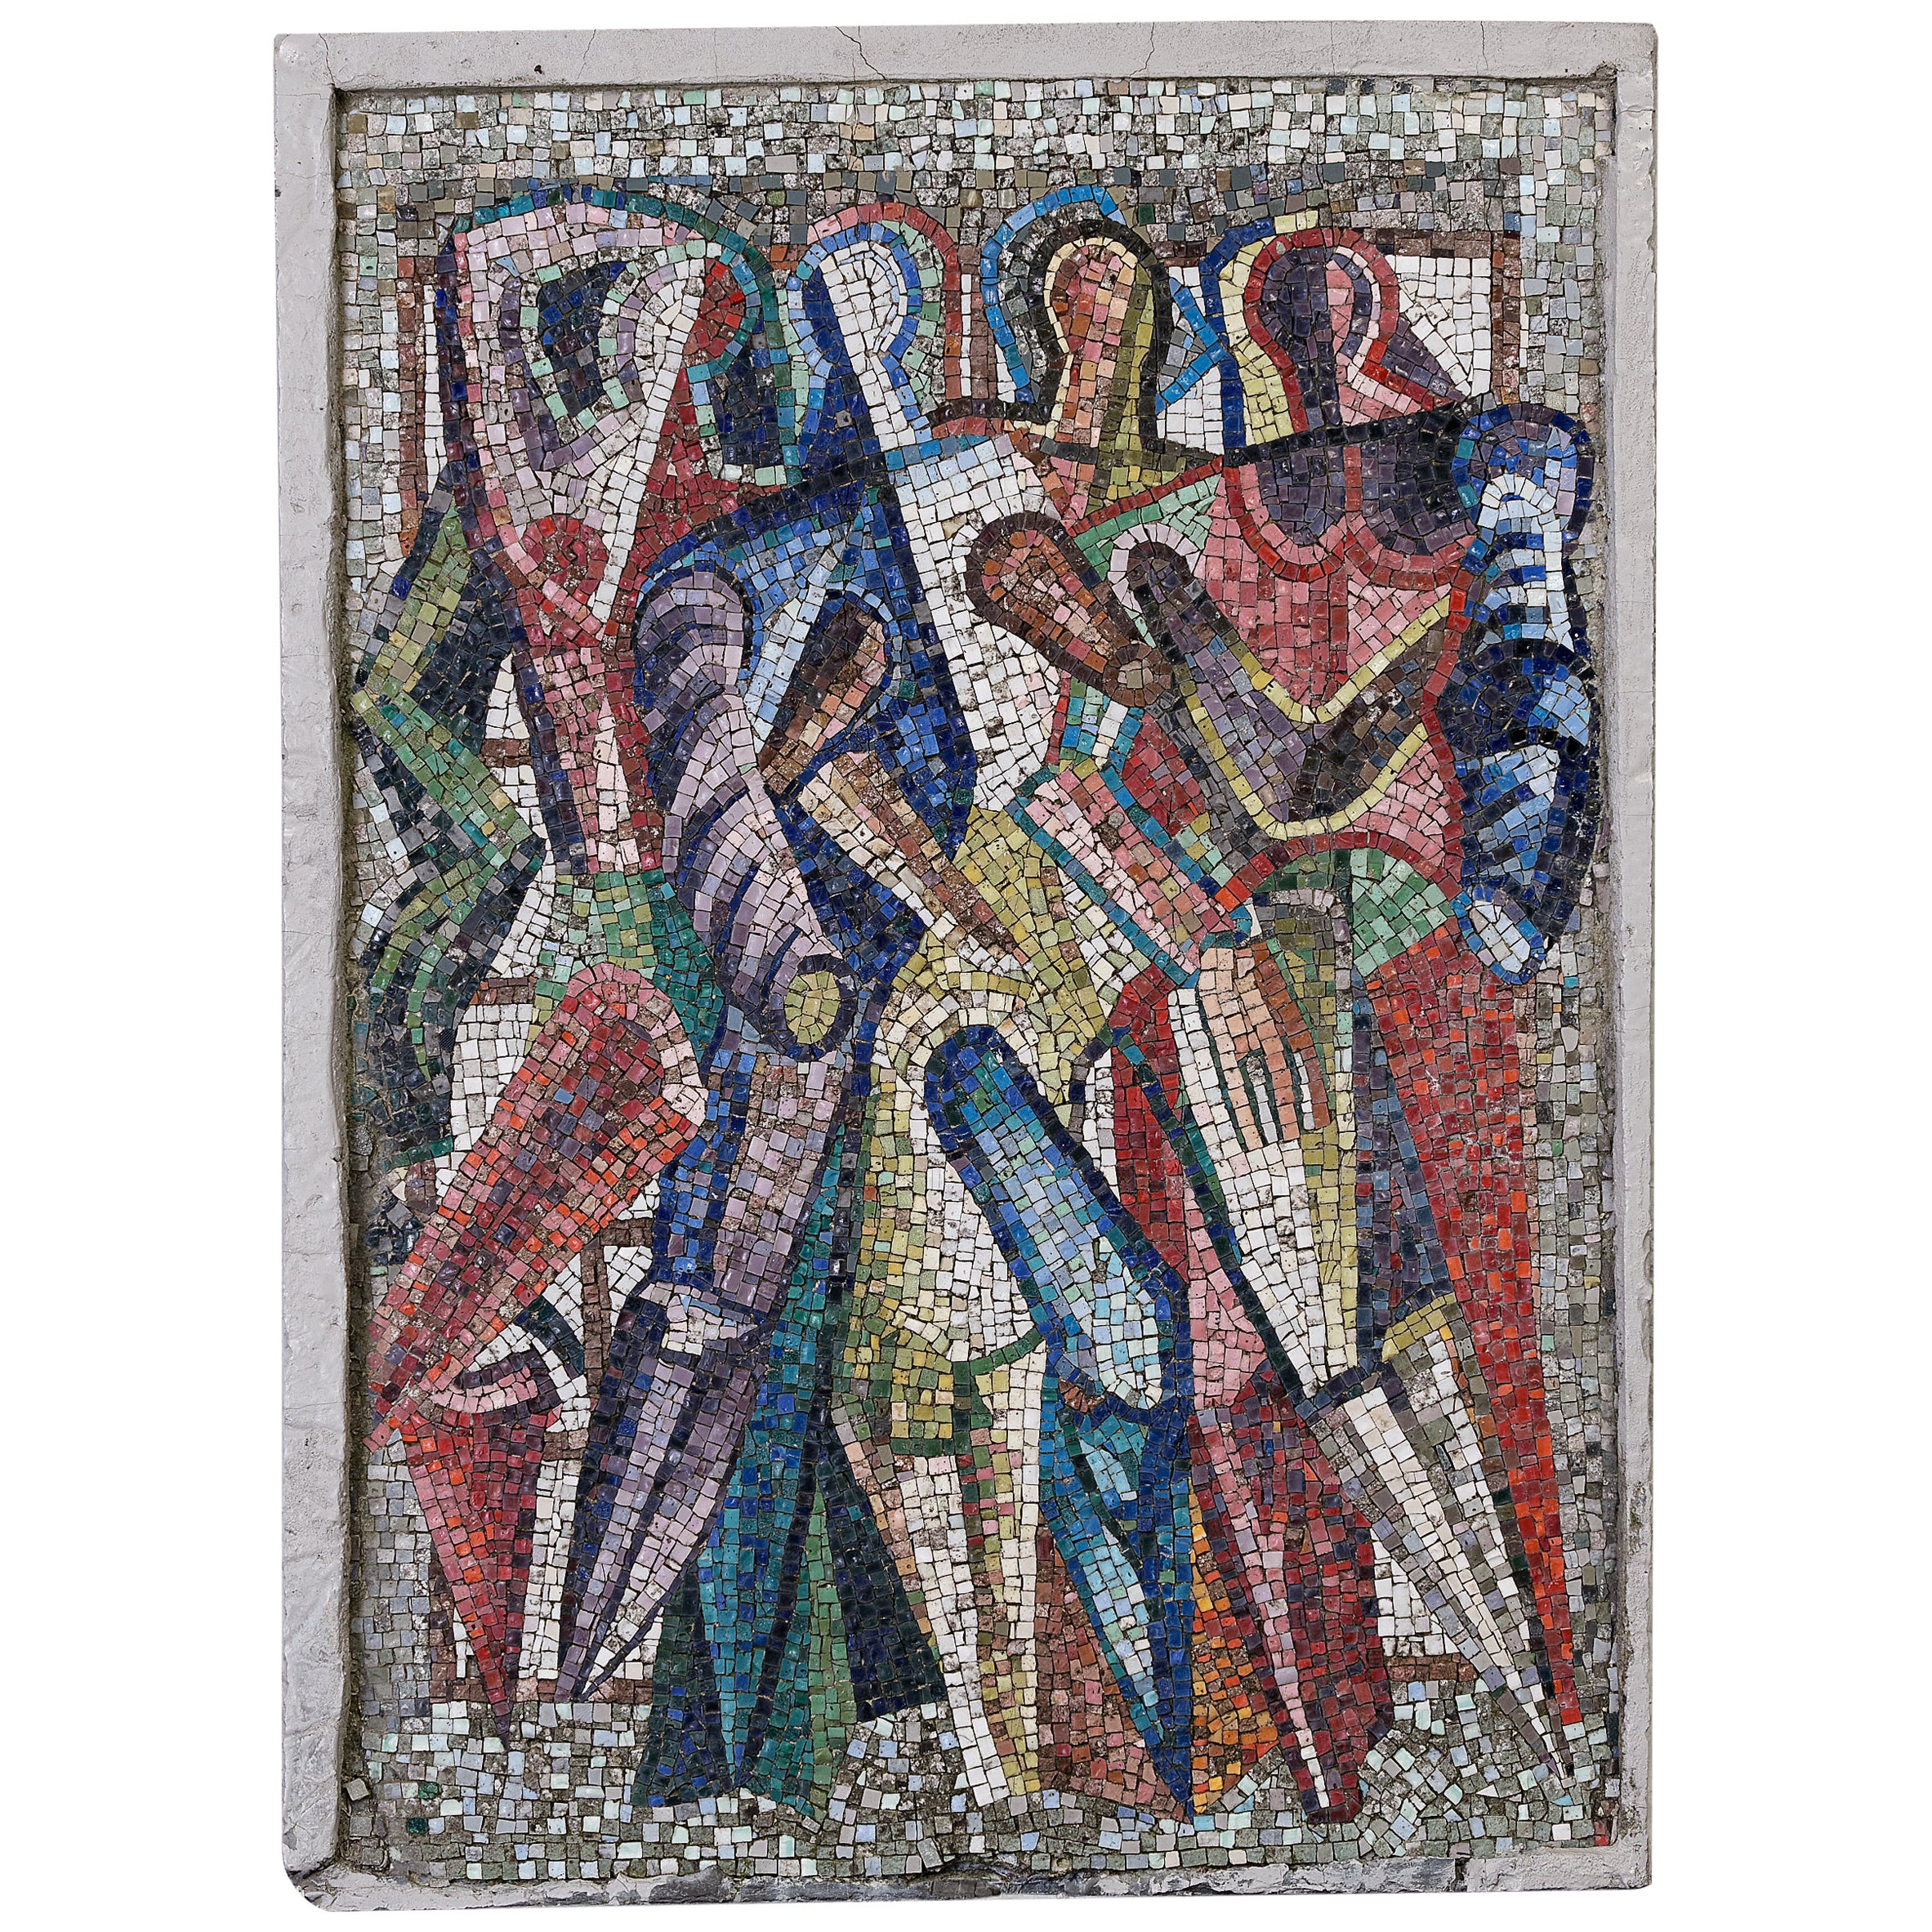 A Large Bright And Colorful Mosaic With Abstract Figures, Petronella & Jacob  For Sale